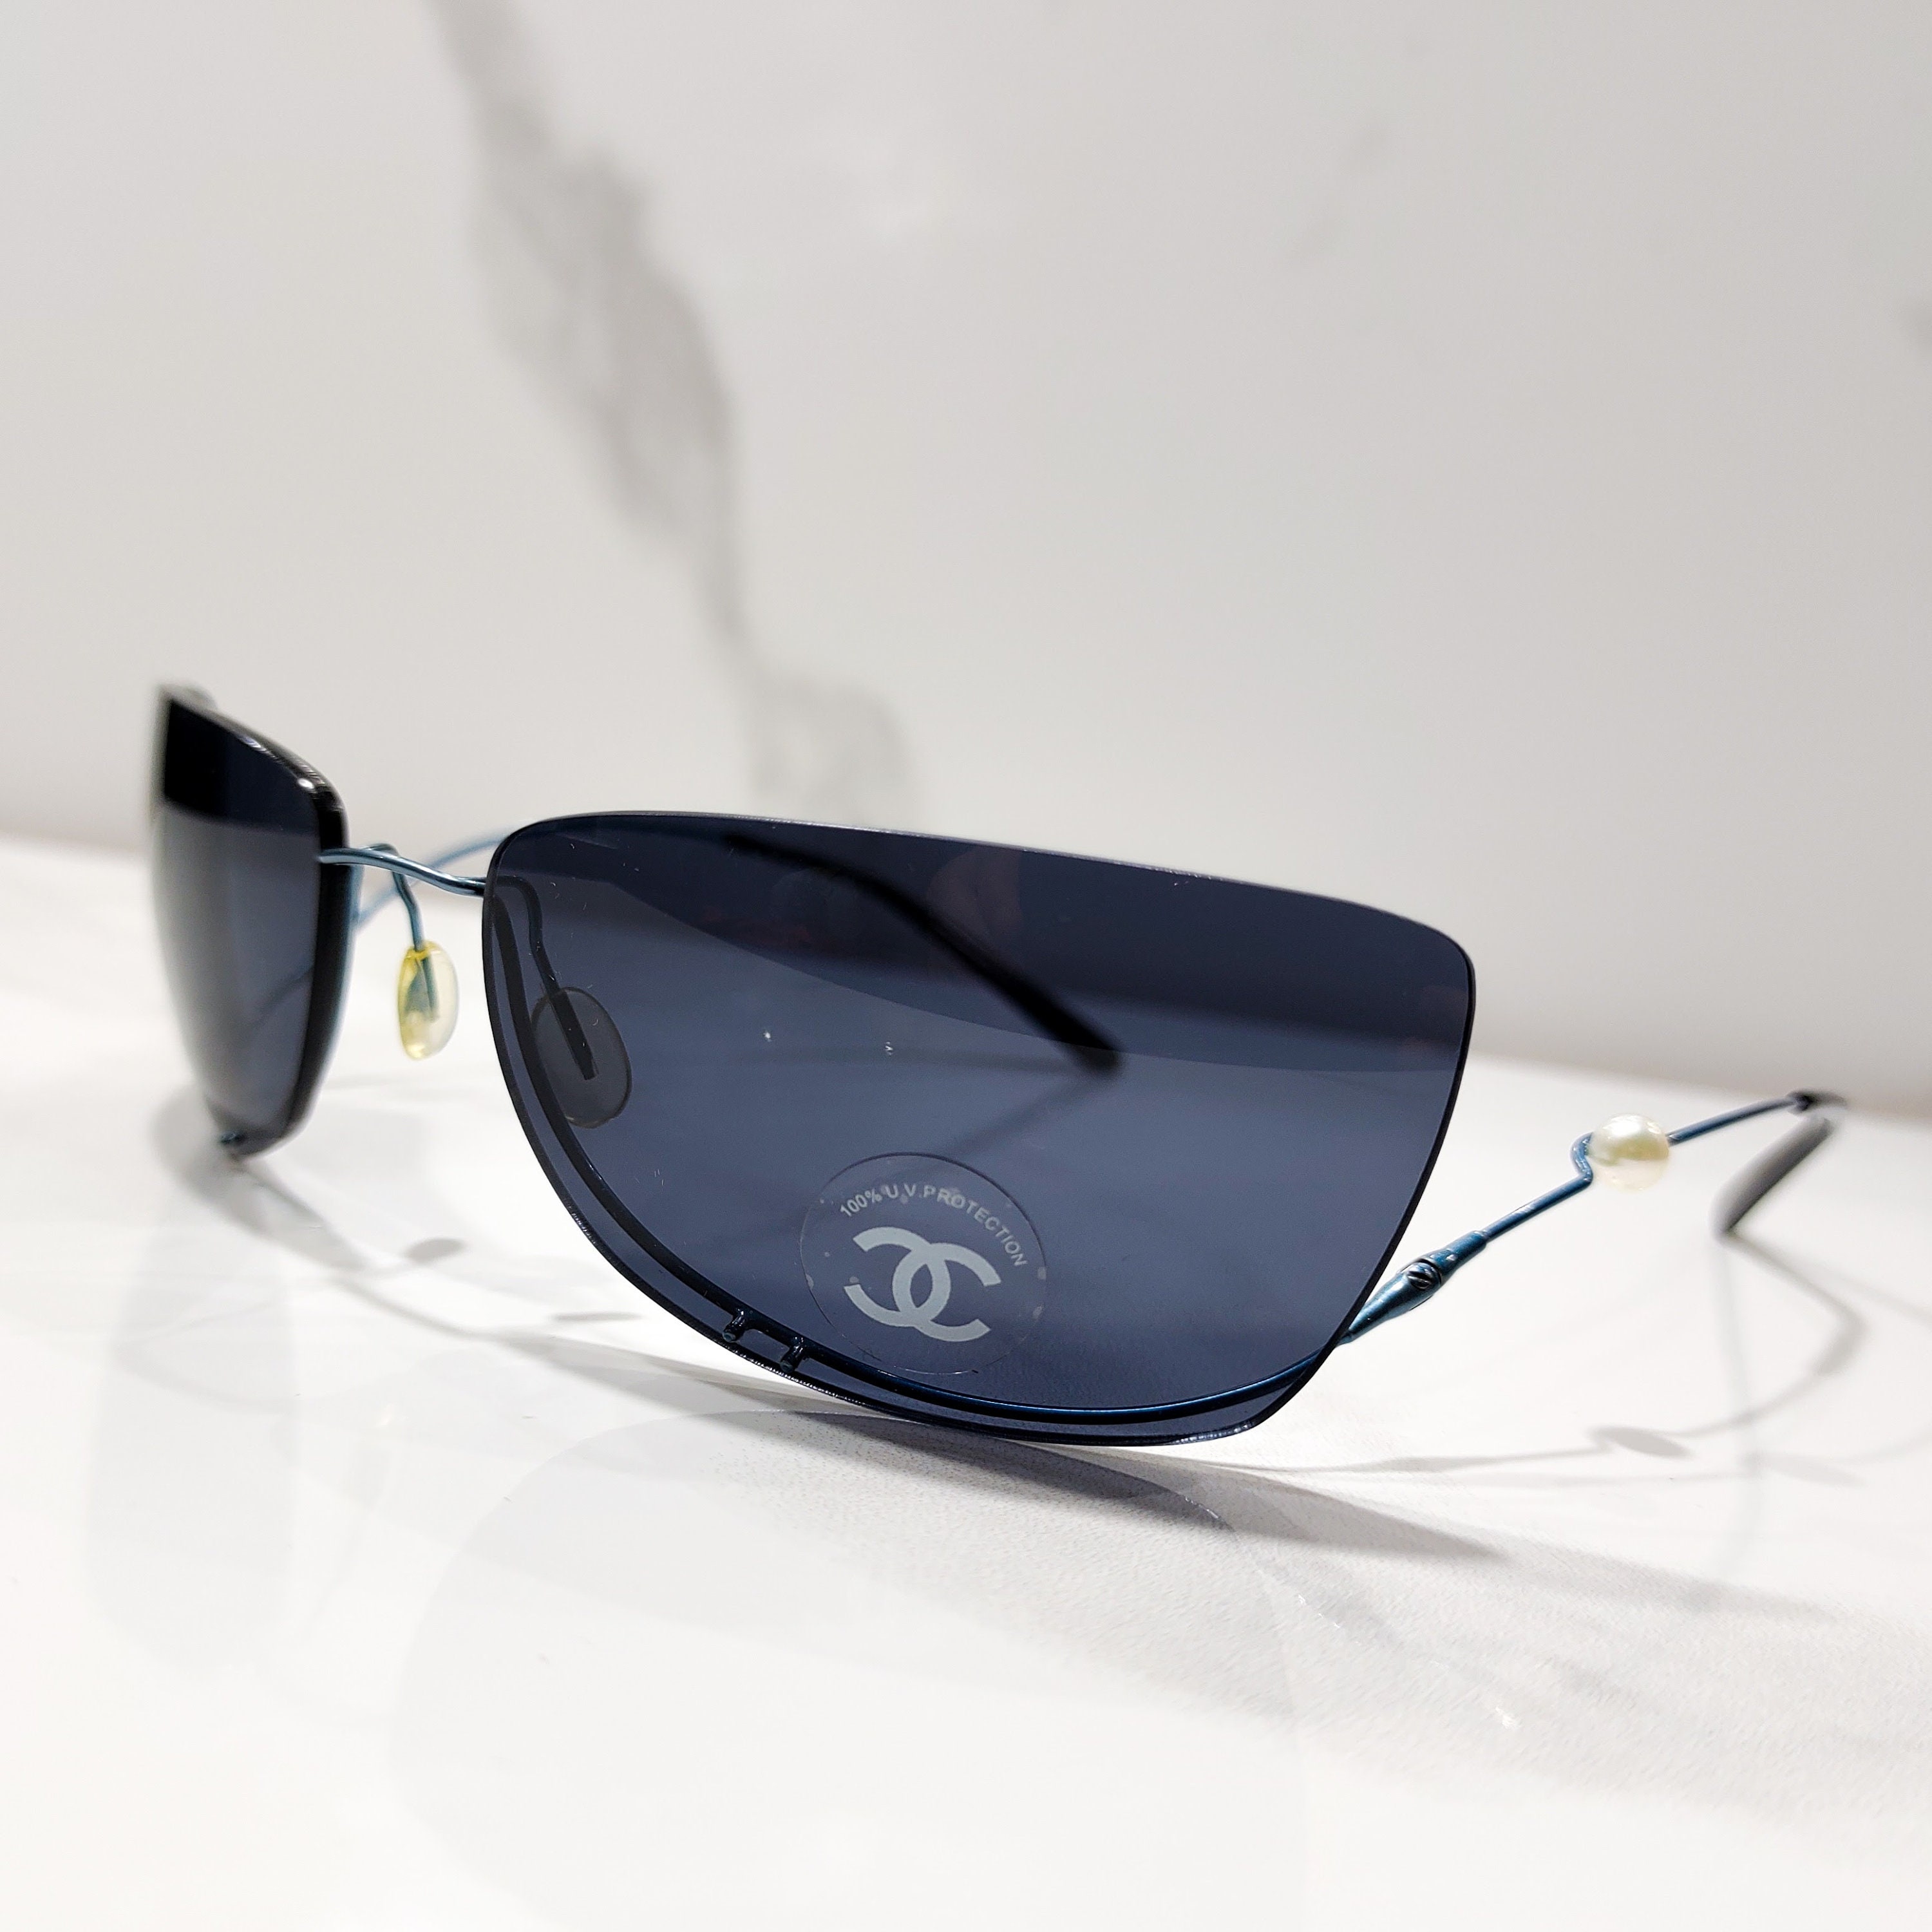 CHANEL mask or oversize rimless glasses for the city or skiing